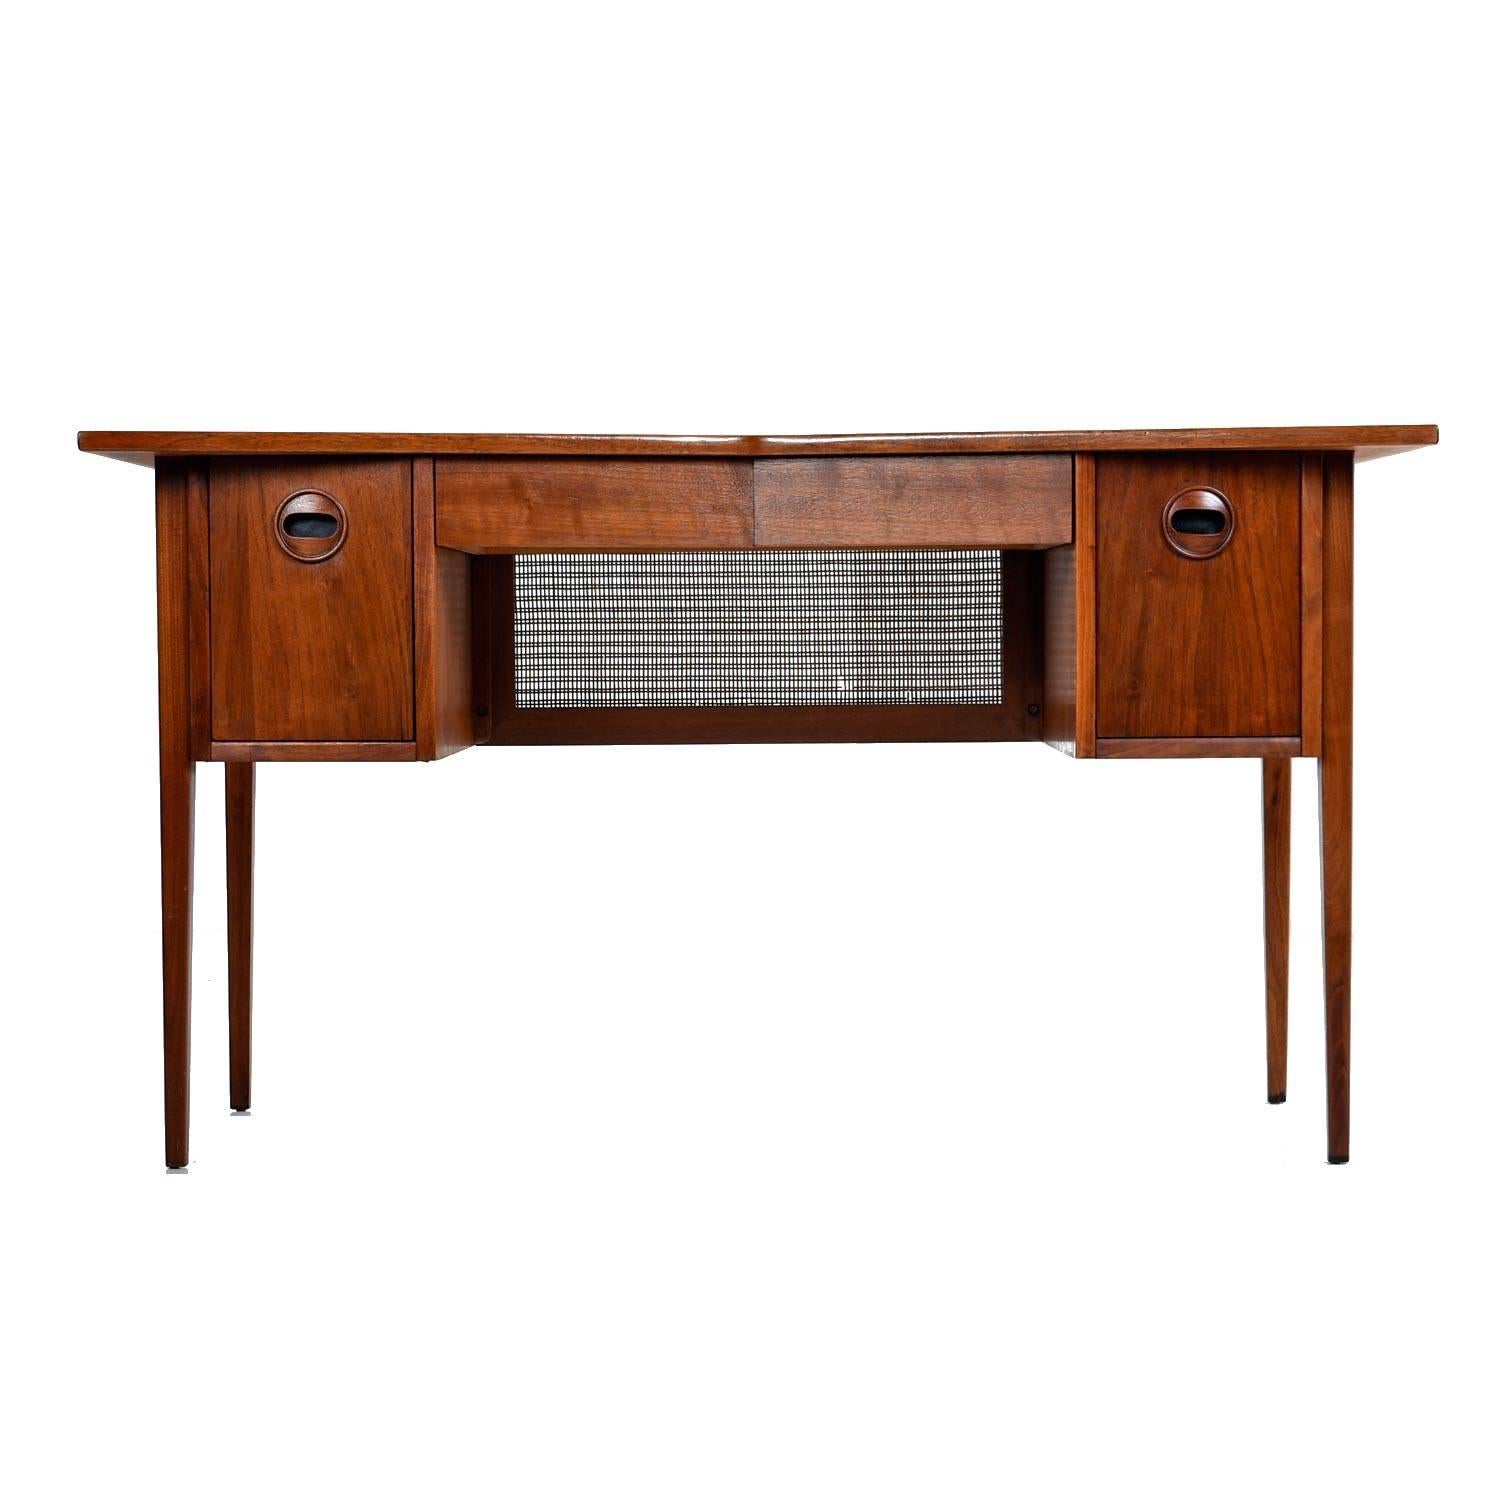 Stunning Mid-Century Modern desk with solid walnut bow tie shaped top surface. Professionally refinished to bring back it’s original glory. The decades old wood has a rich patina from age. Most unique is the bow tie shaped top surface. Practical as